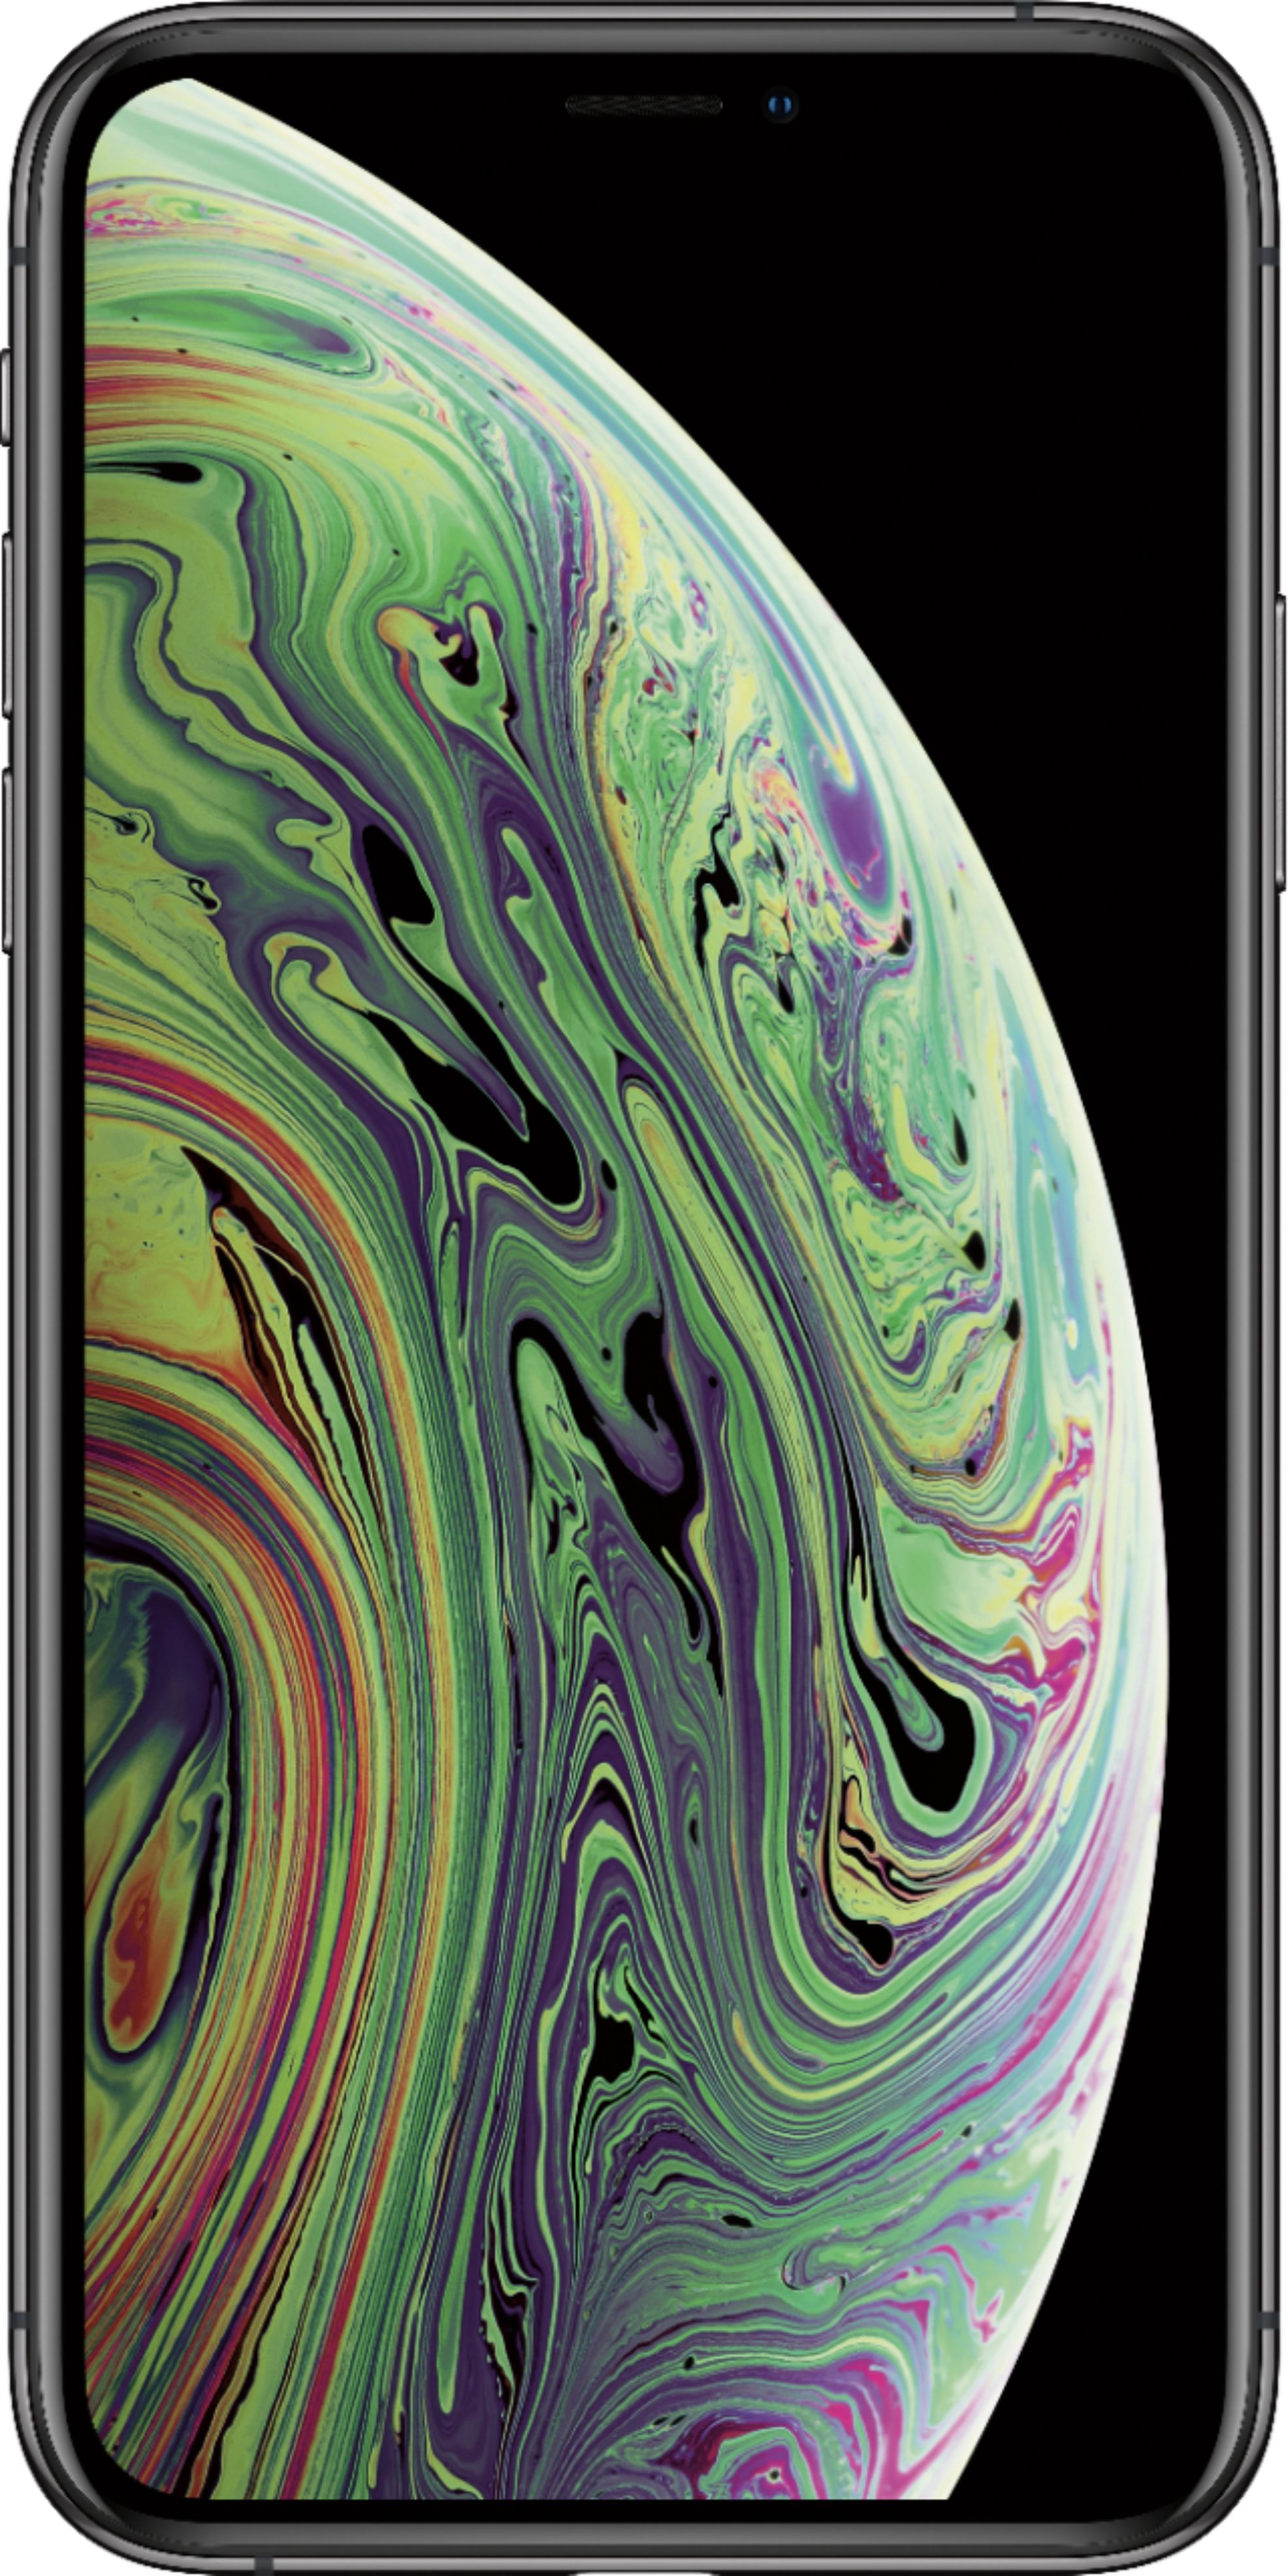 Apple - iPhone XS with 64GB Memory Cell Phone (Unlocked) - Space Gray